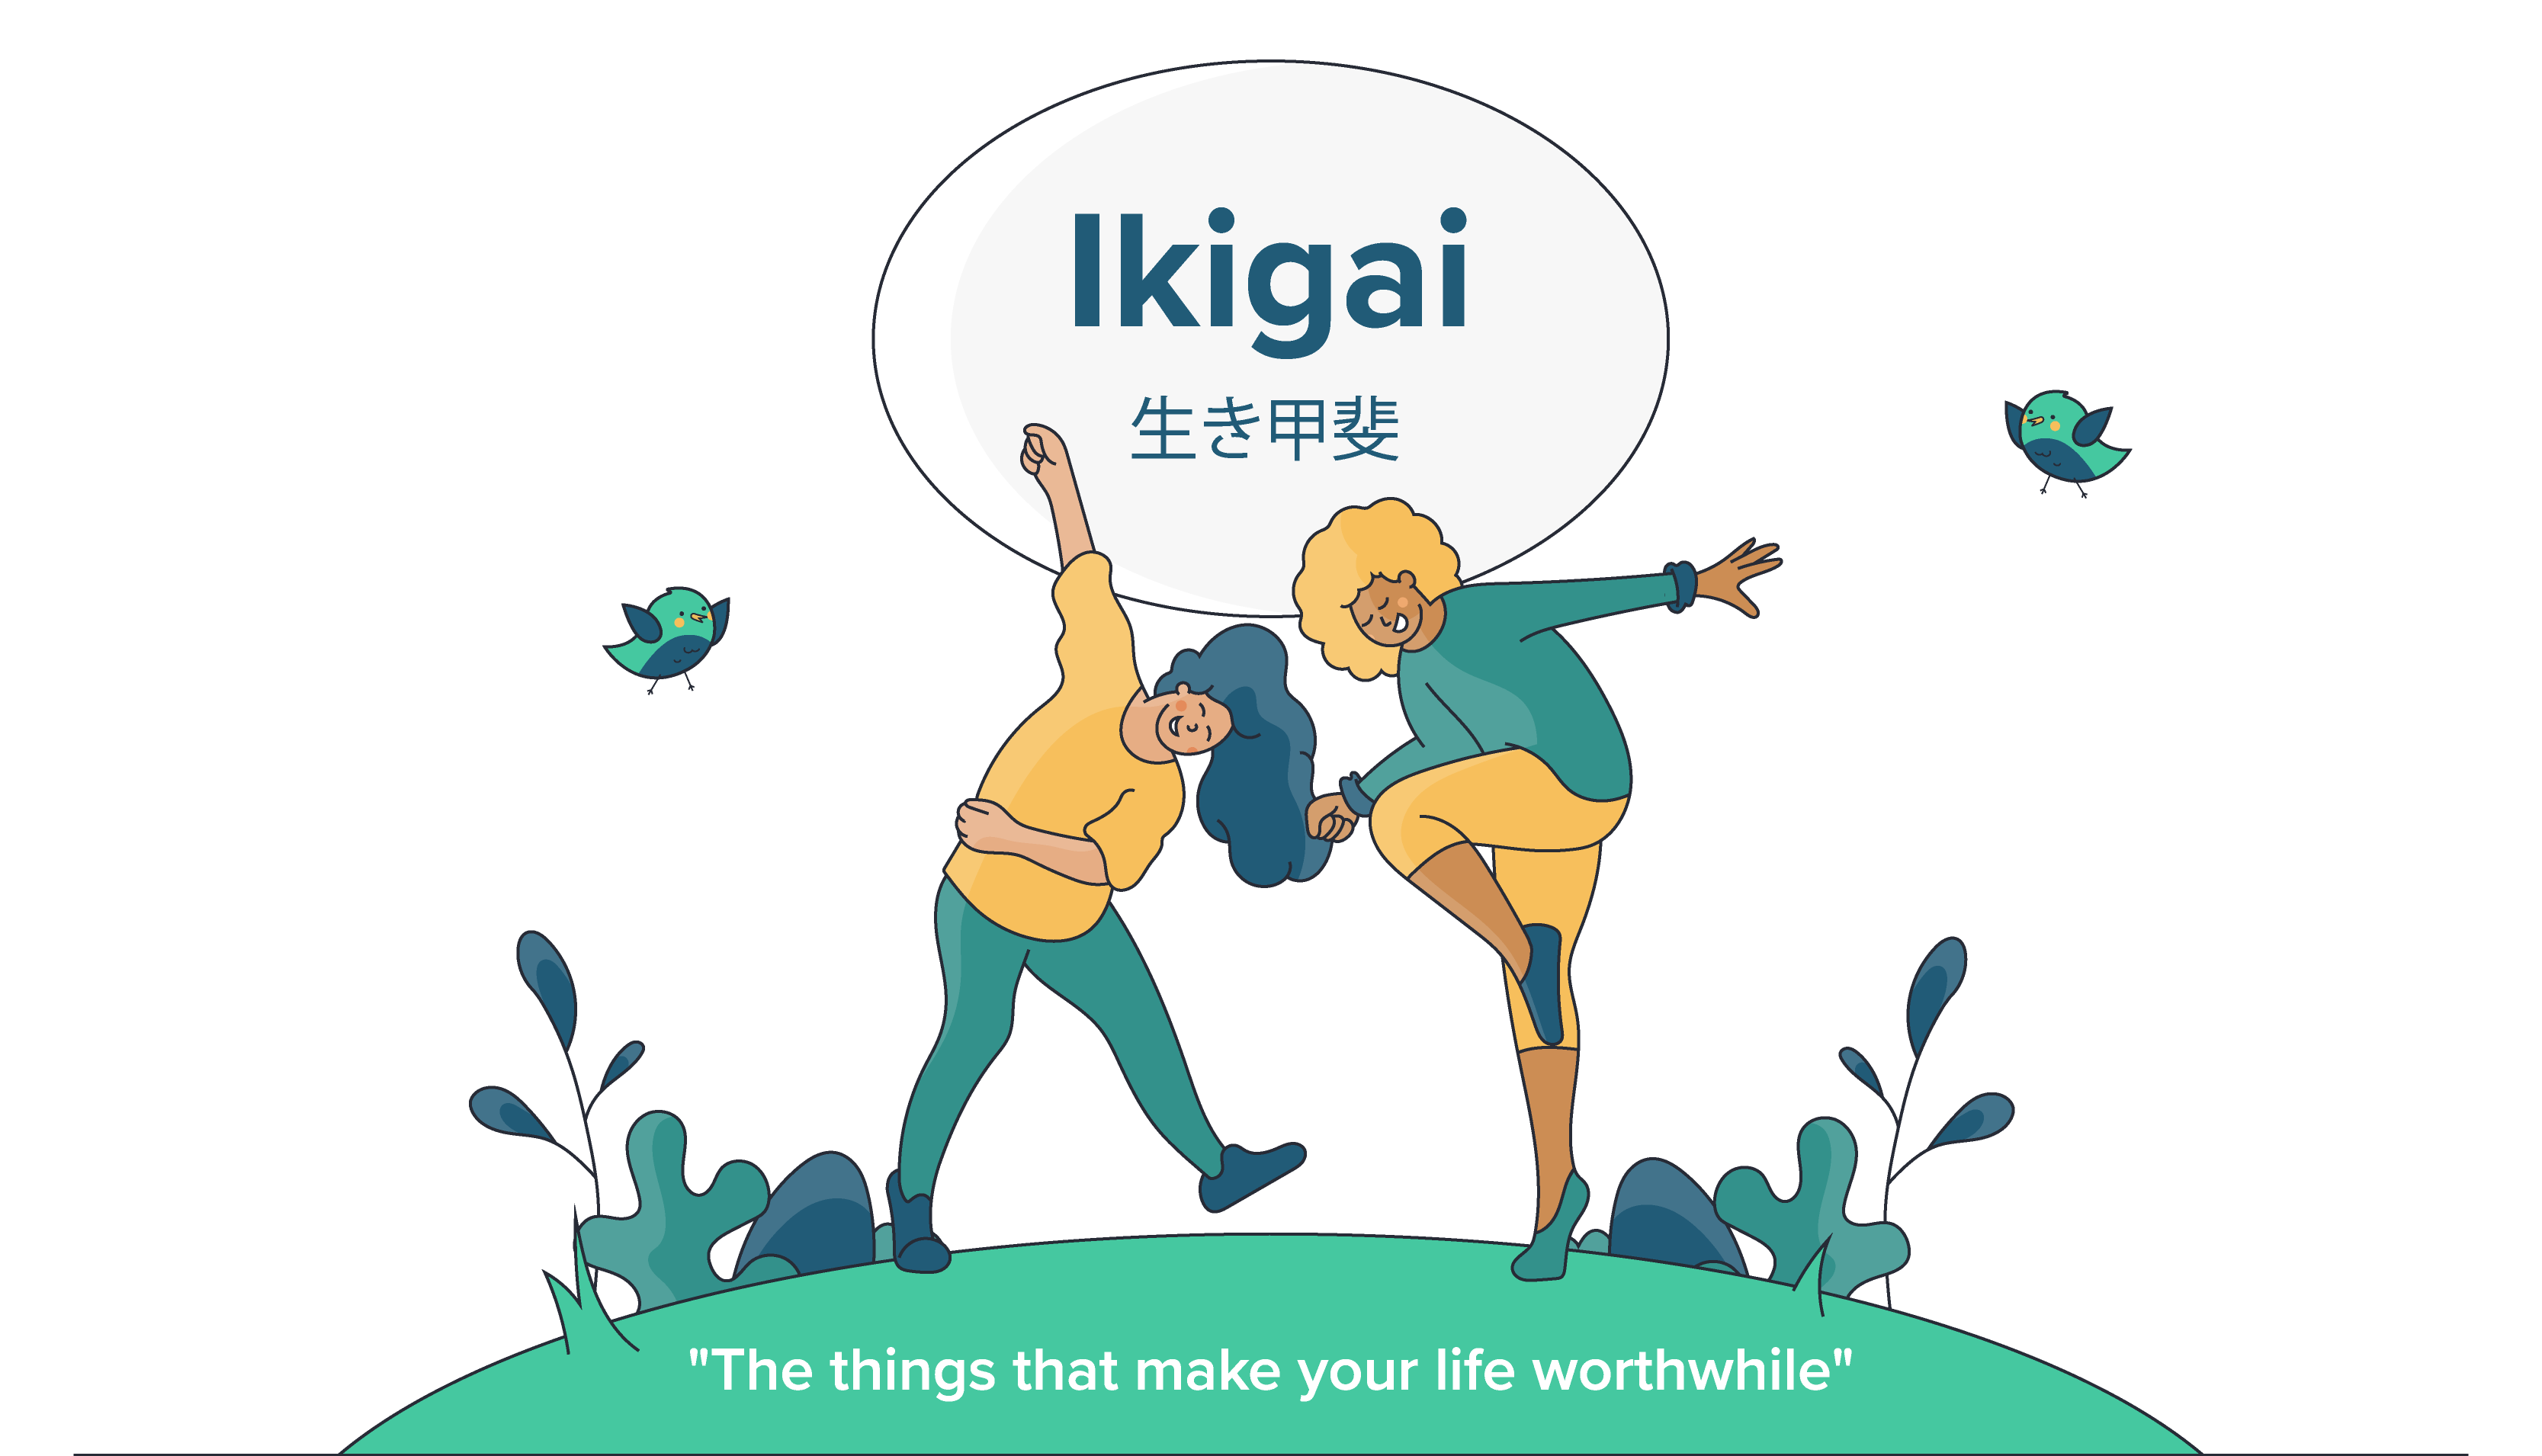 Two persons dancing with joy understanding the meaning of igikai